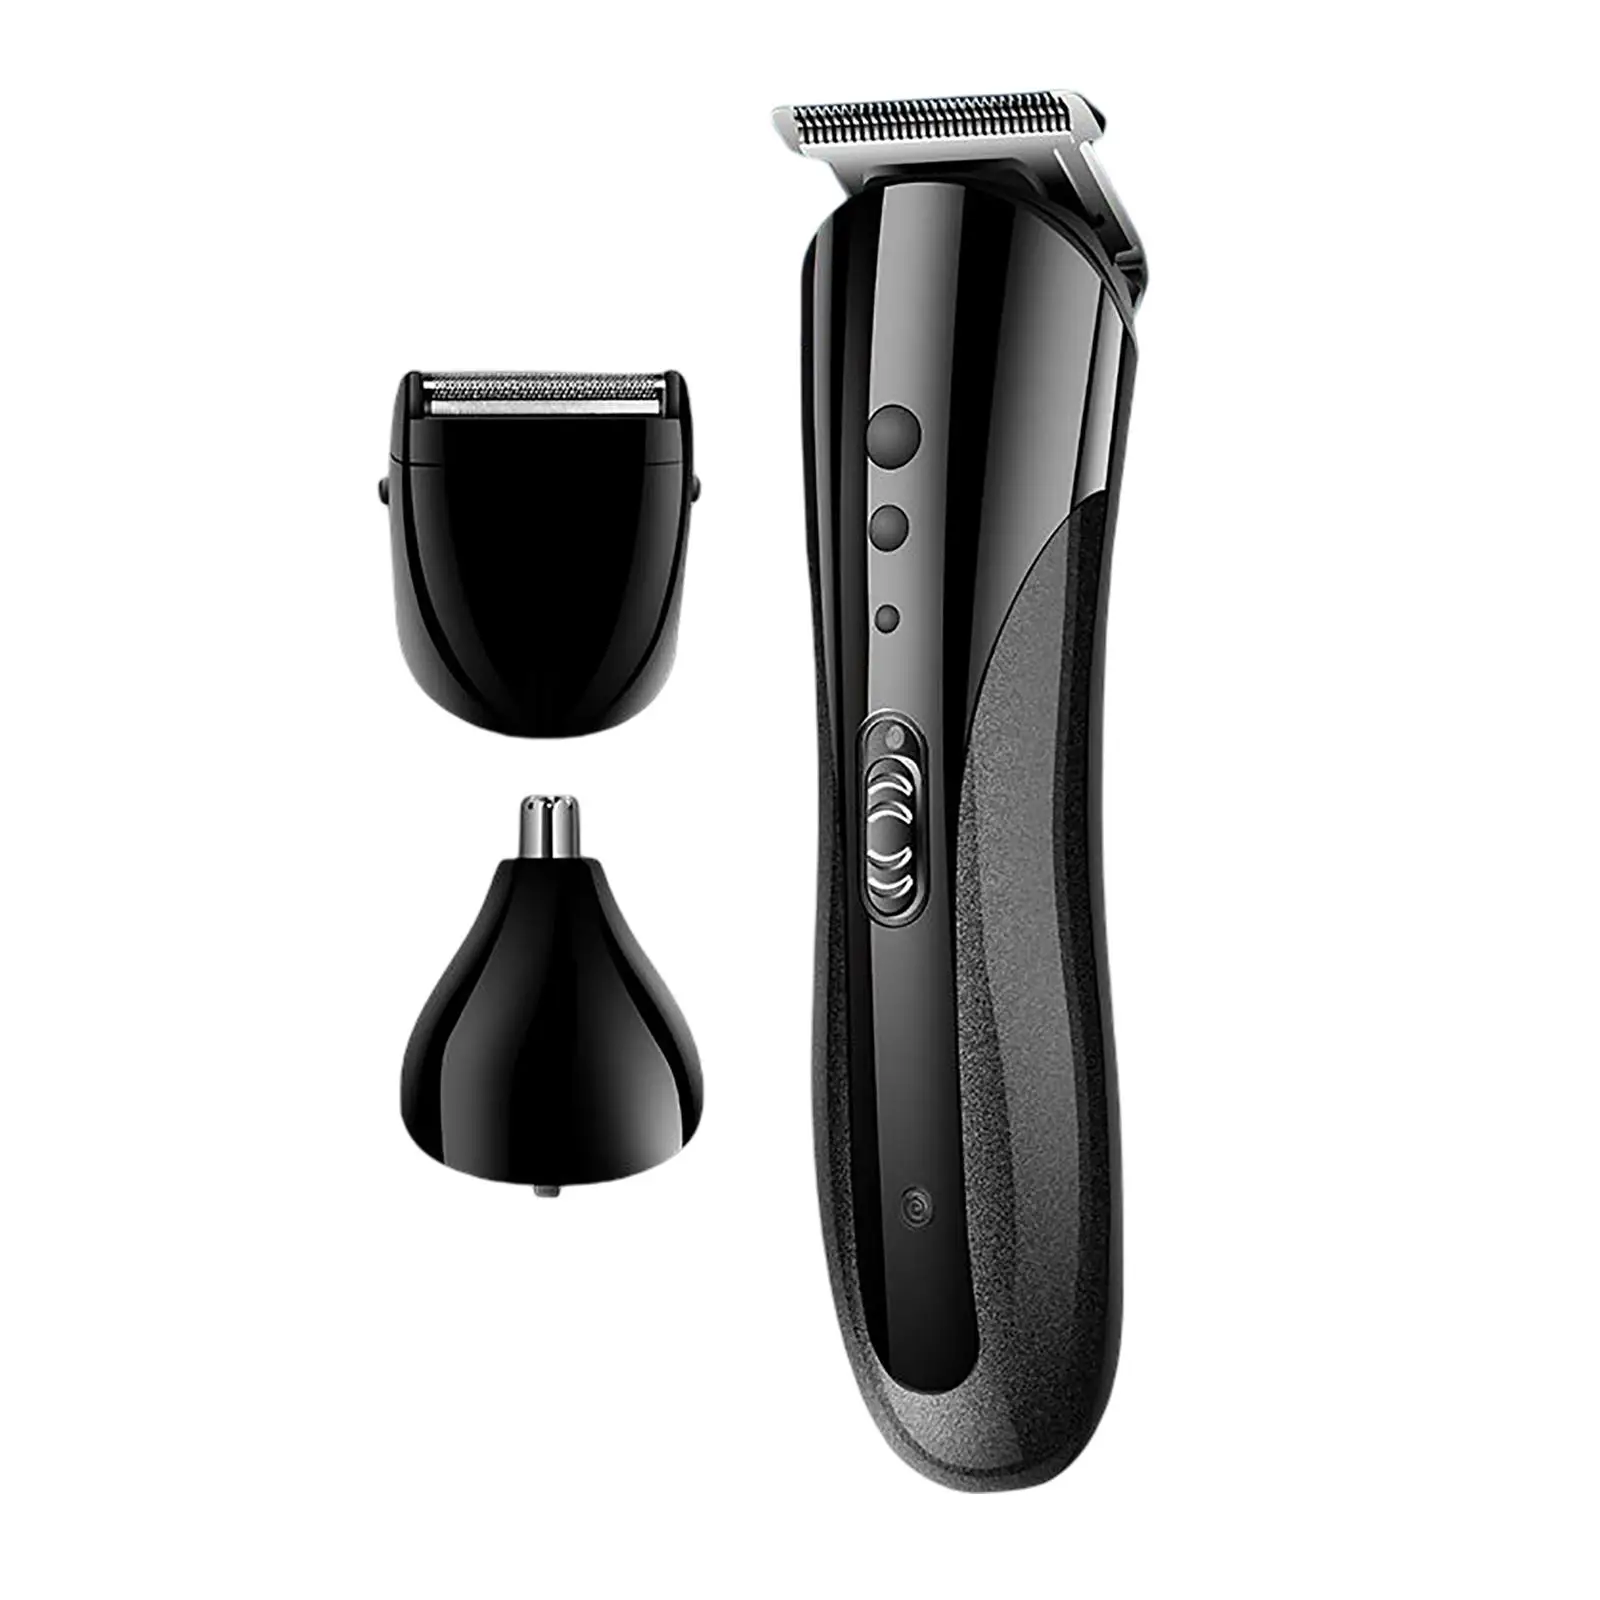 Hair Clippers Trimmer USB Charging Carbon Steel Blades Hair Cutting Hair Shaver Grooming Kit Barber Tool Men Gifts EU